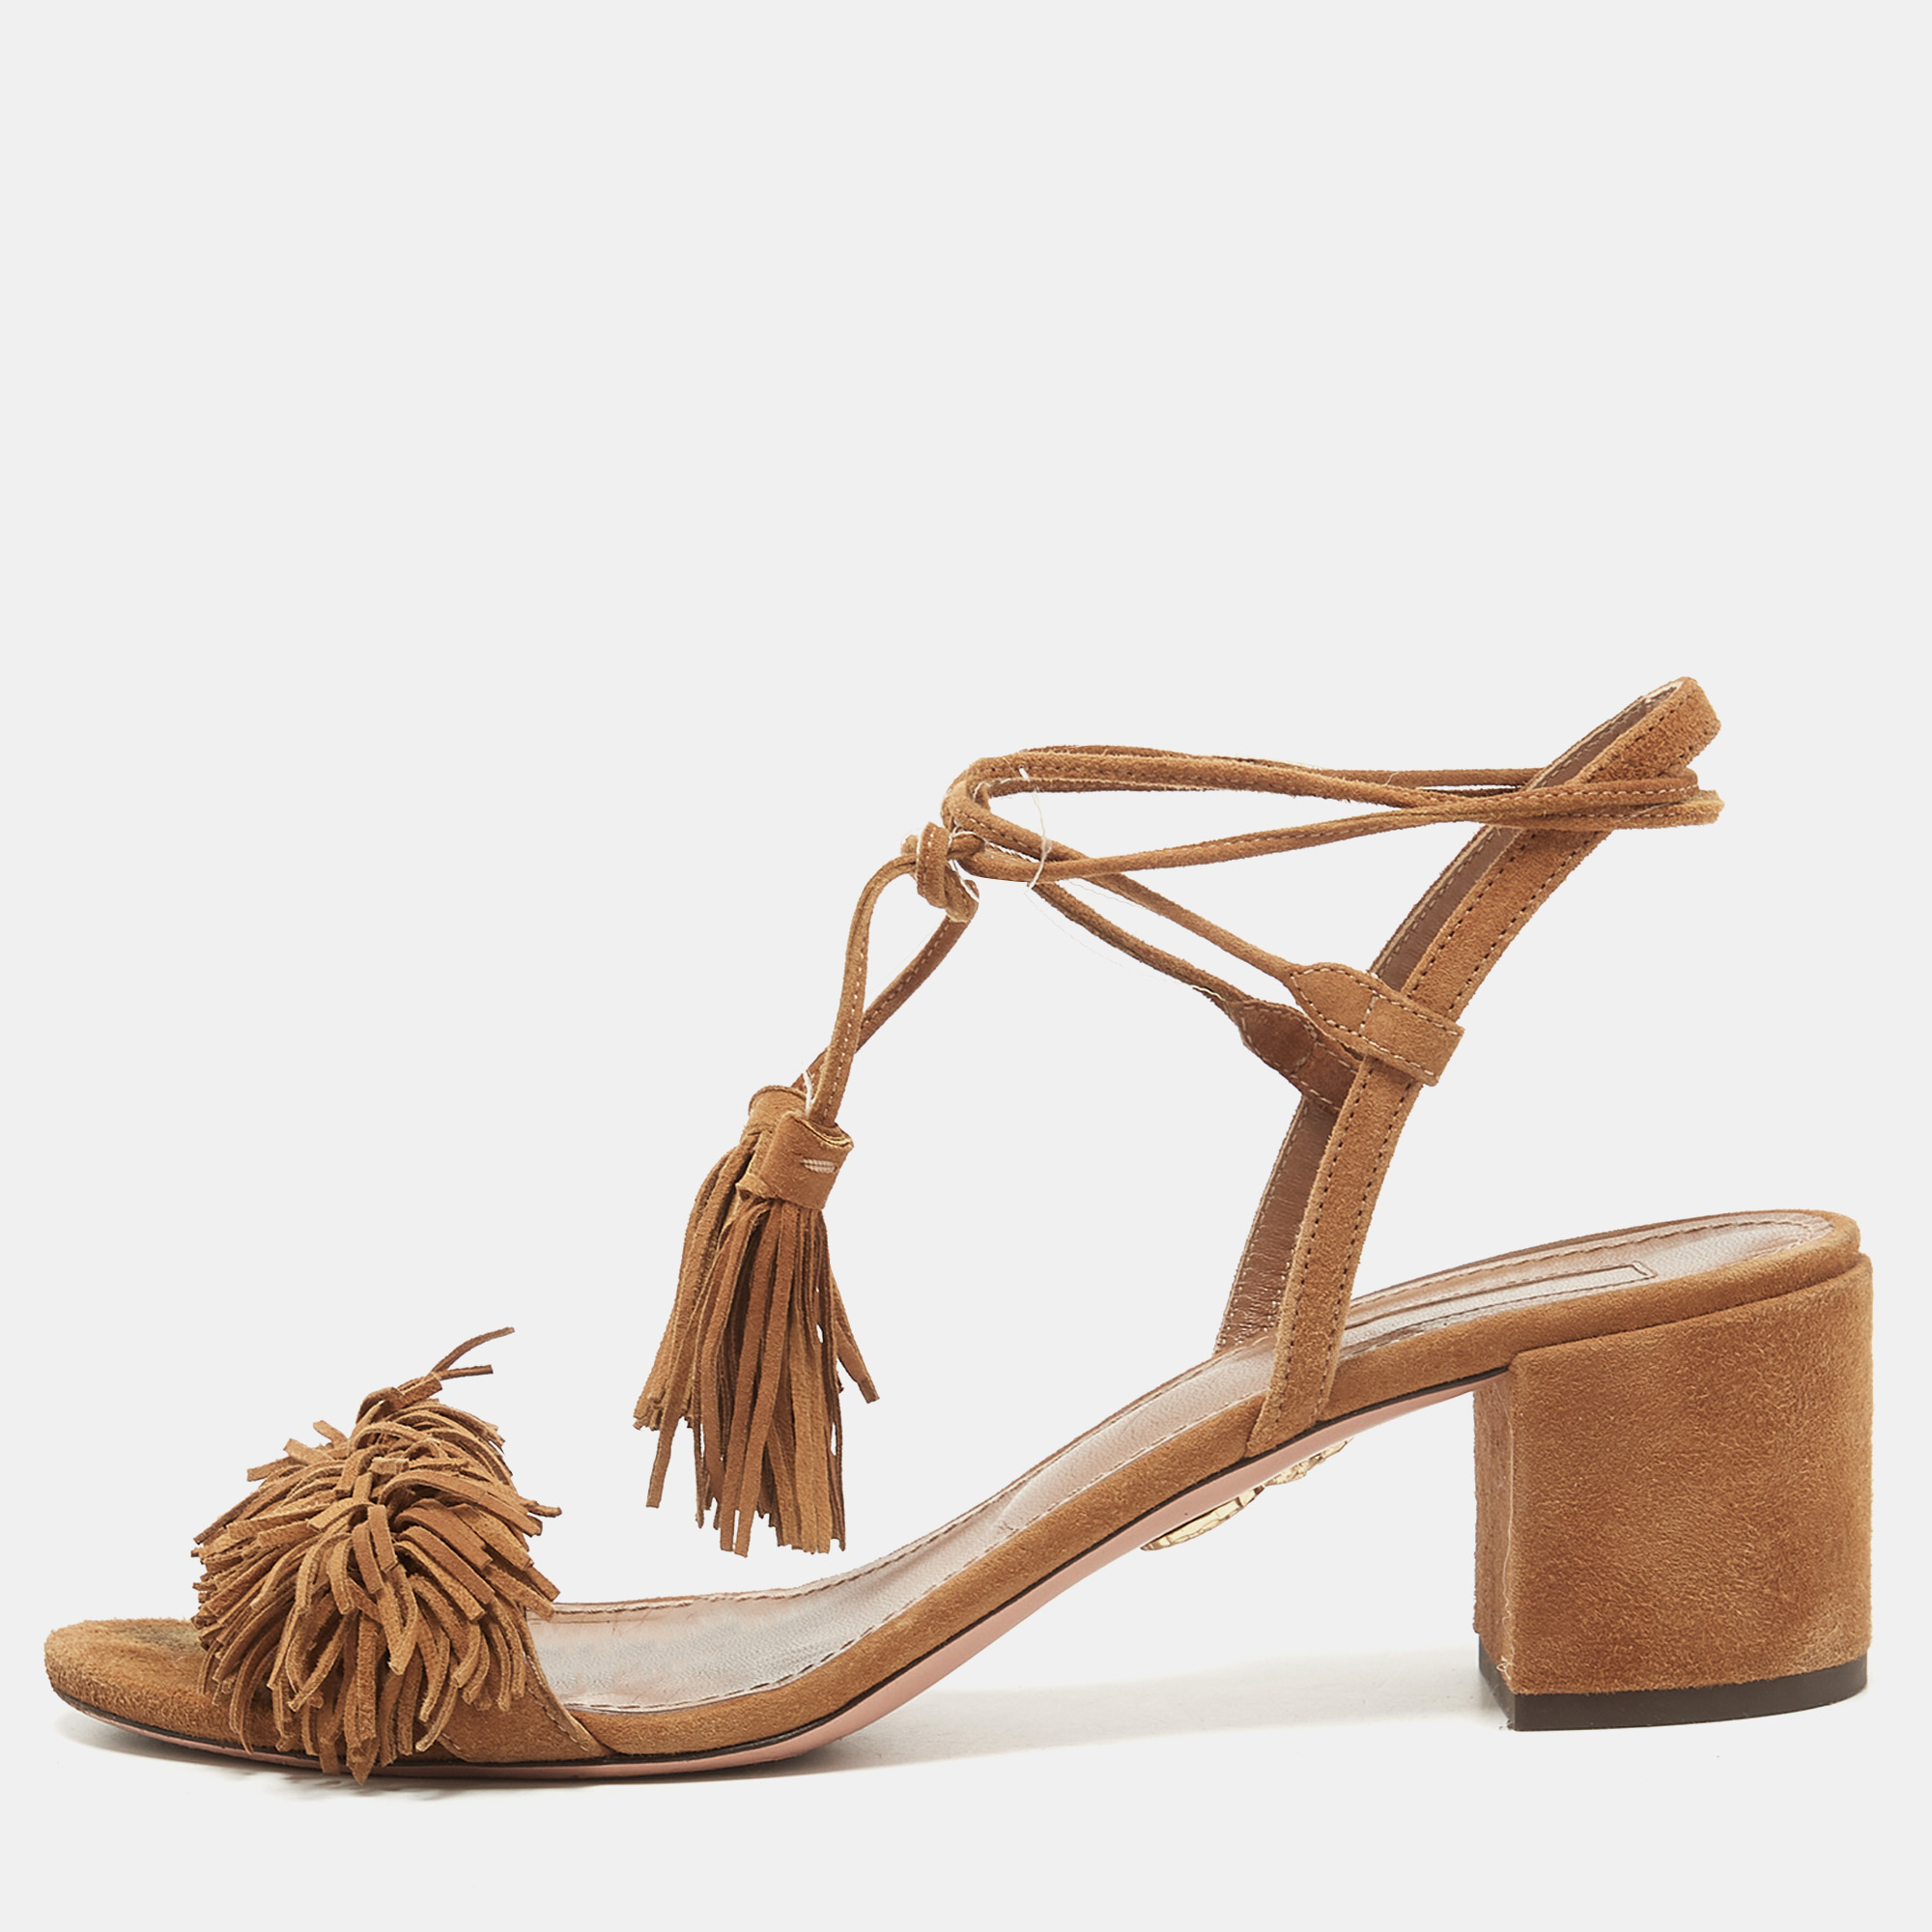 Pre-owned Aquazzura Brown Suede Wild Thing Fringe Ankle Wrap Block Heel Sandals Size 39